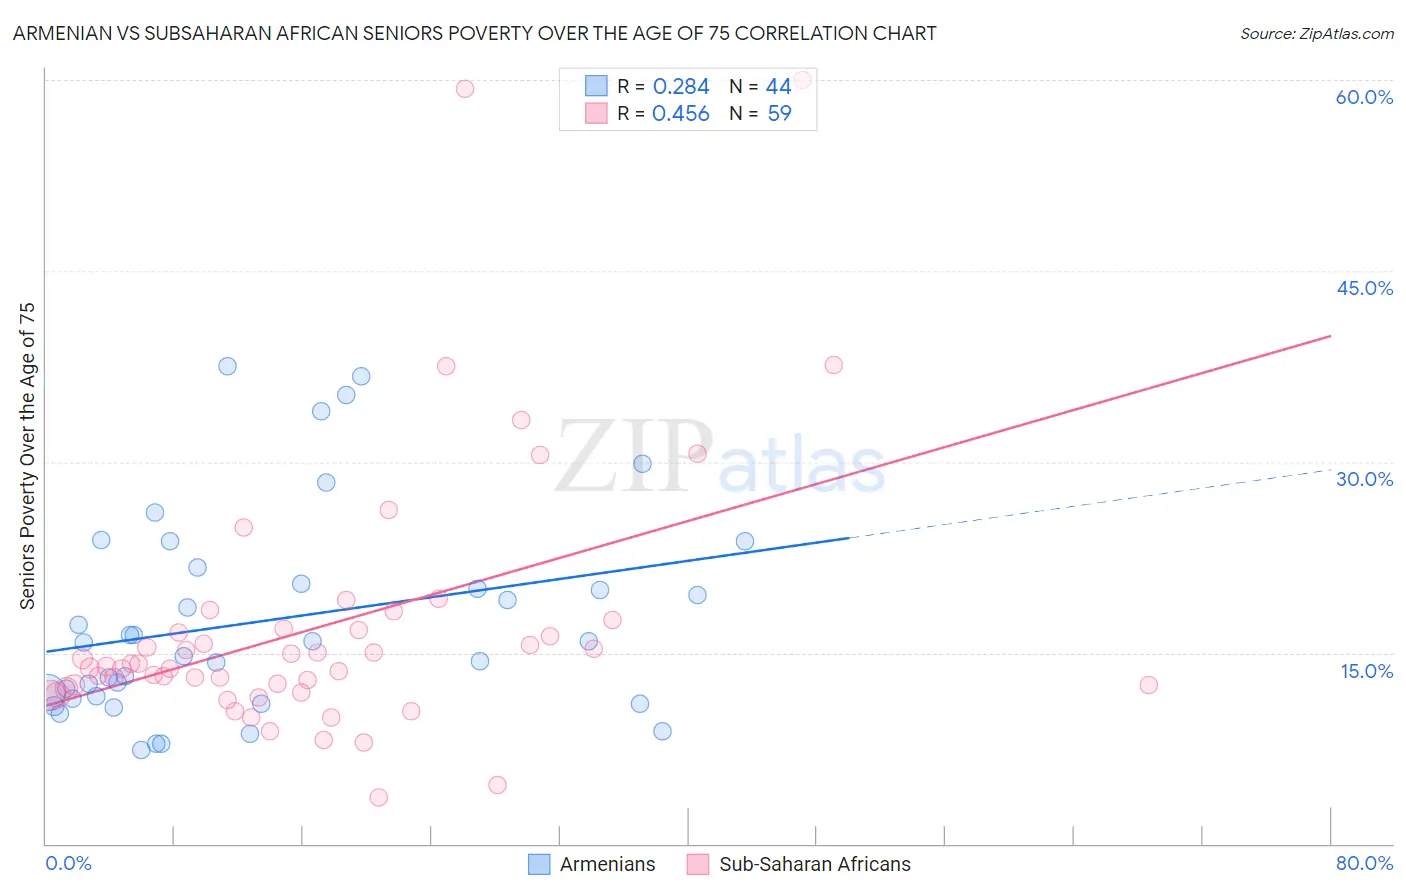 Armenian vs Subsaharan African Seniors Poverty Over the Age of 75